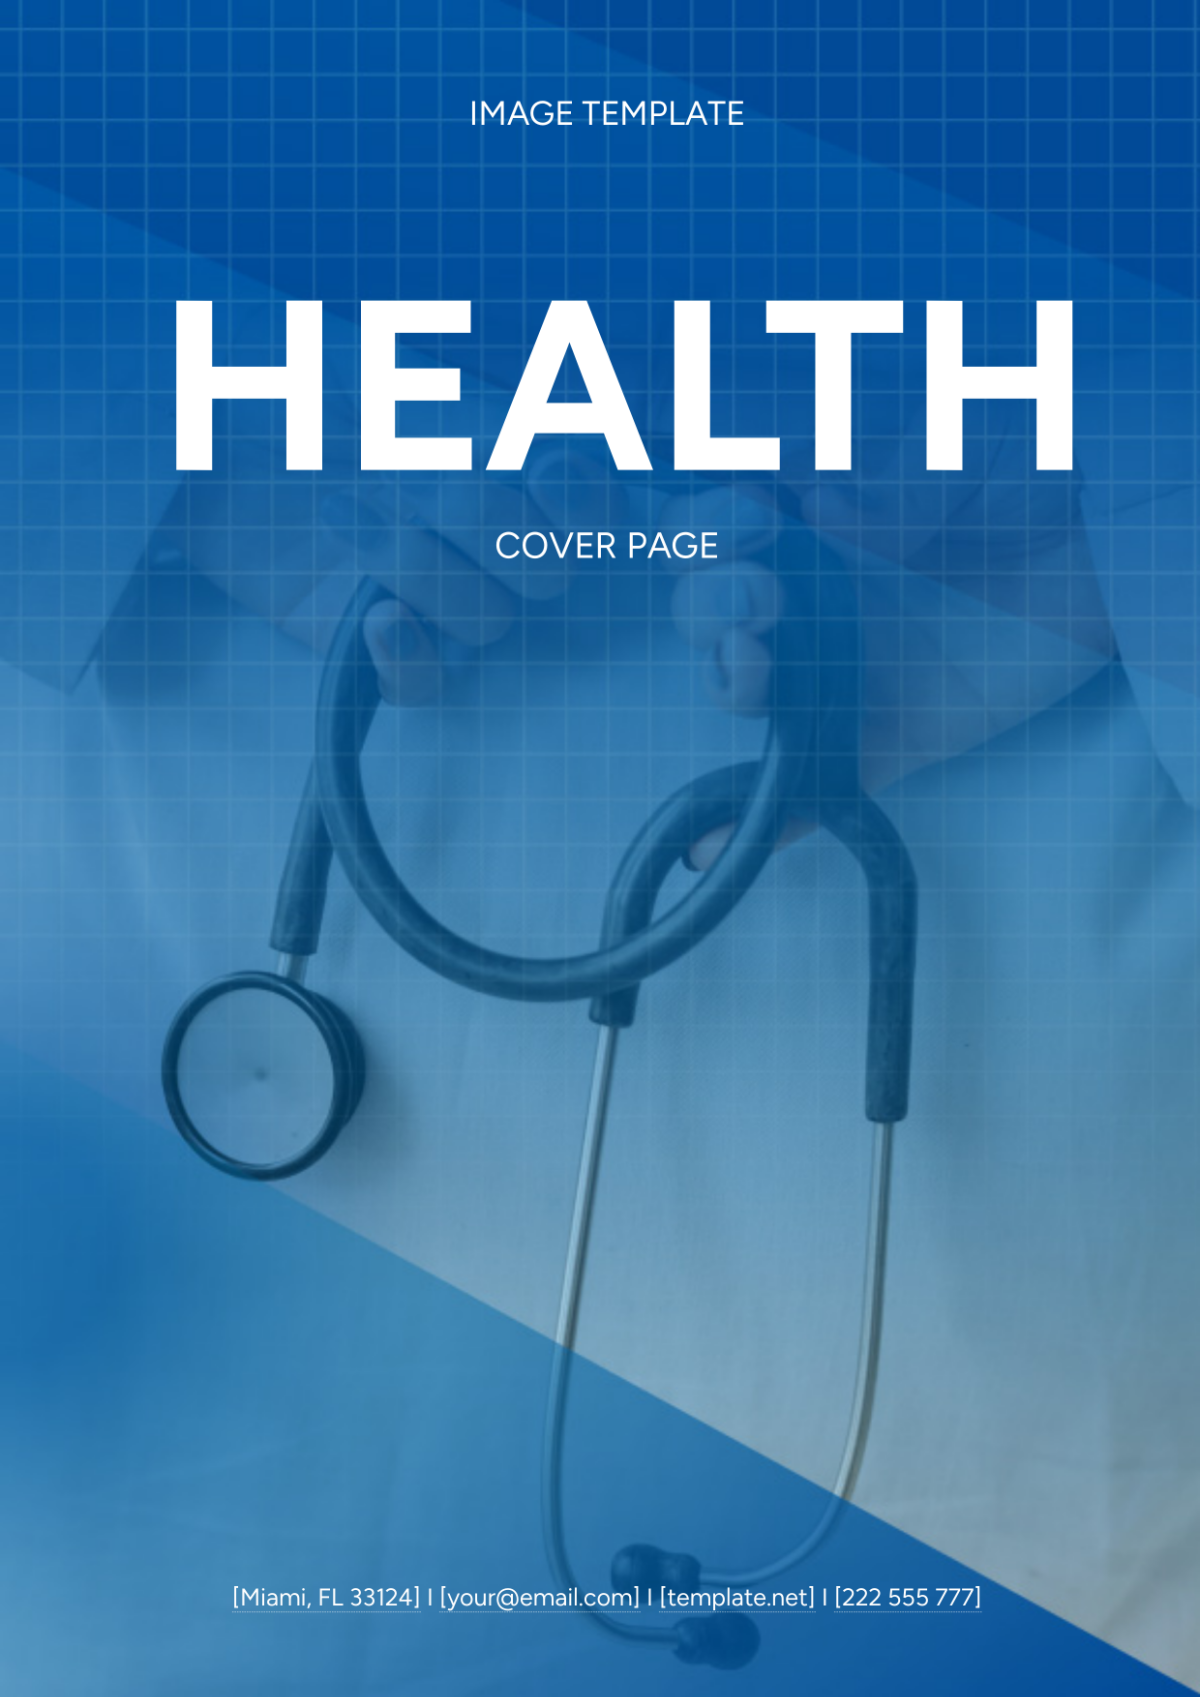 Health Cover Page Image Template